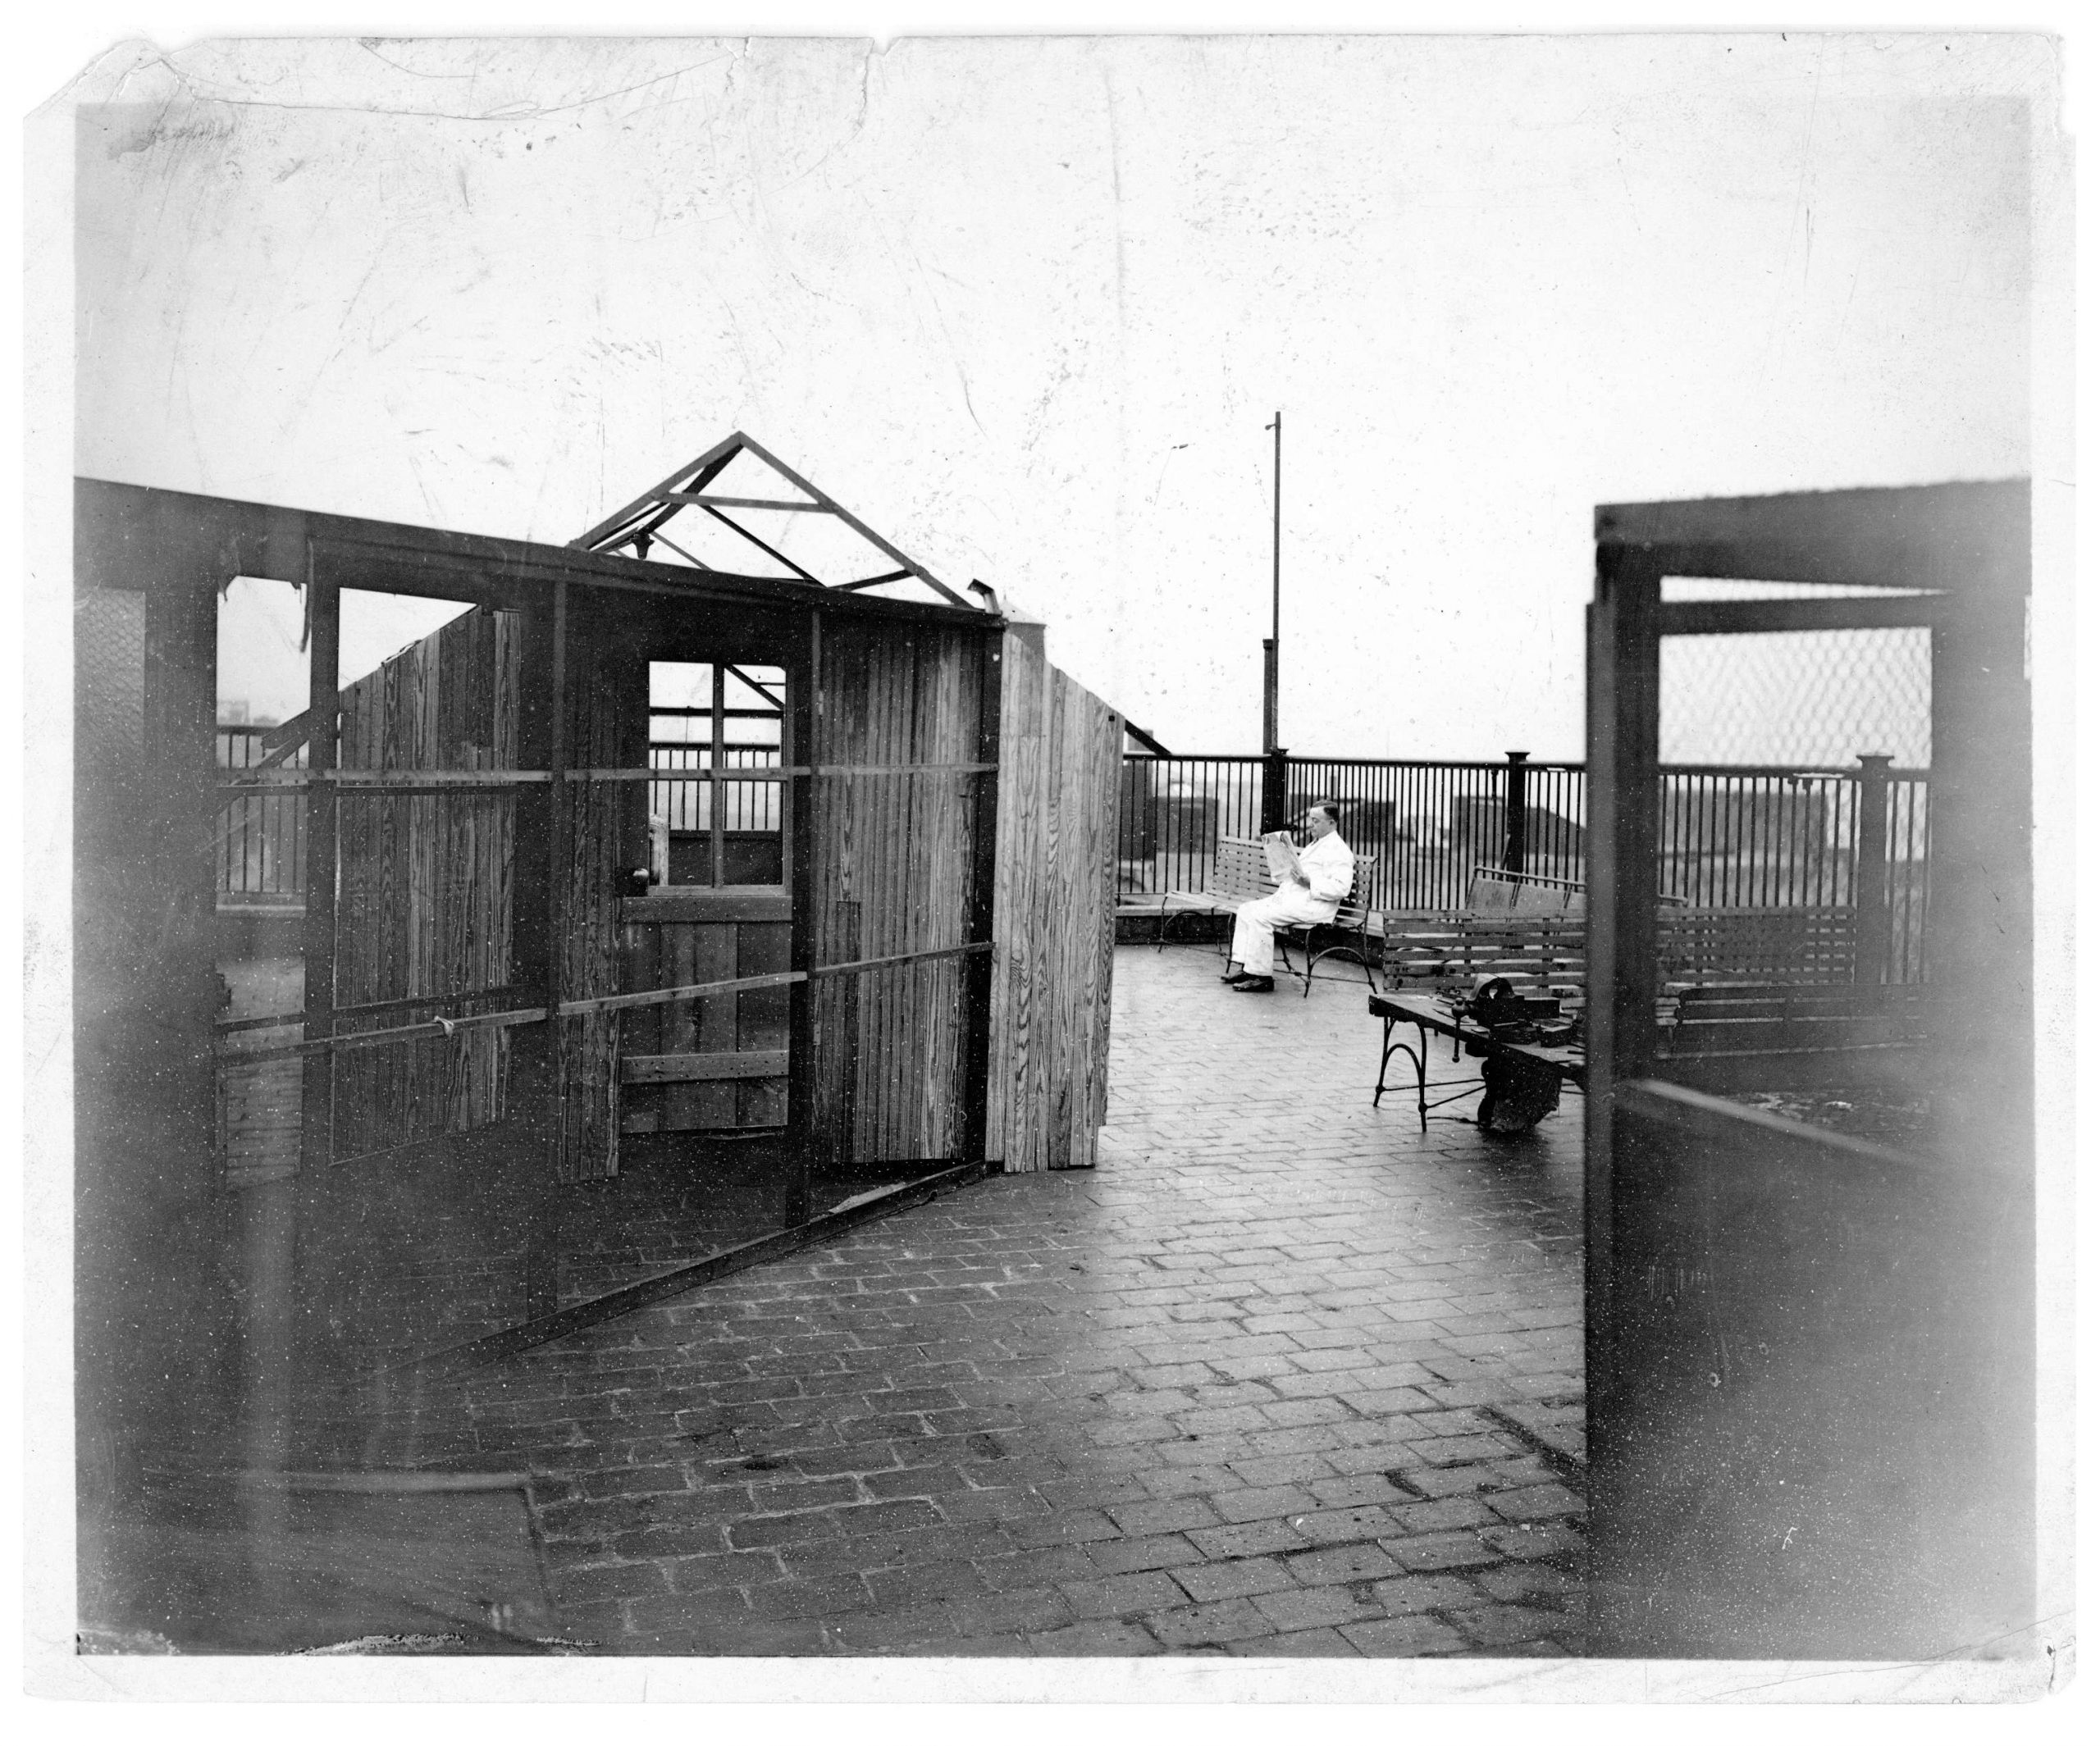 Black and white photograph from 1910. The rooftop of the Jefferson and Cherry Streets. In the foreground there is a solarium, a greenhouse like structure with a glass ceiling and wooden walls. In the background, a doctor reads a newspaper.